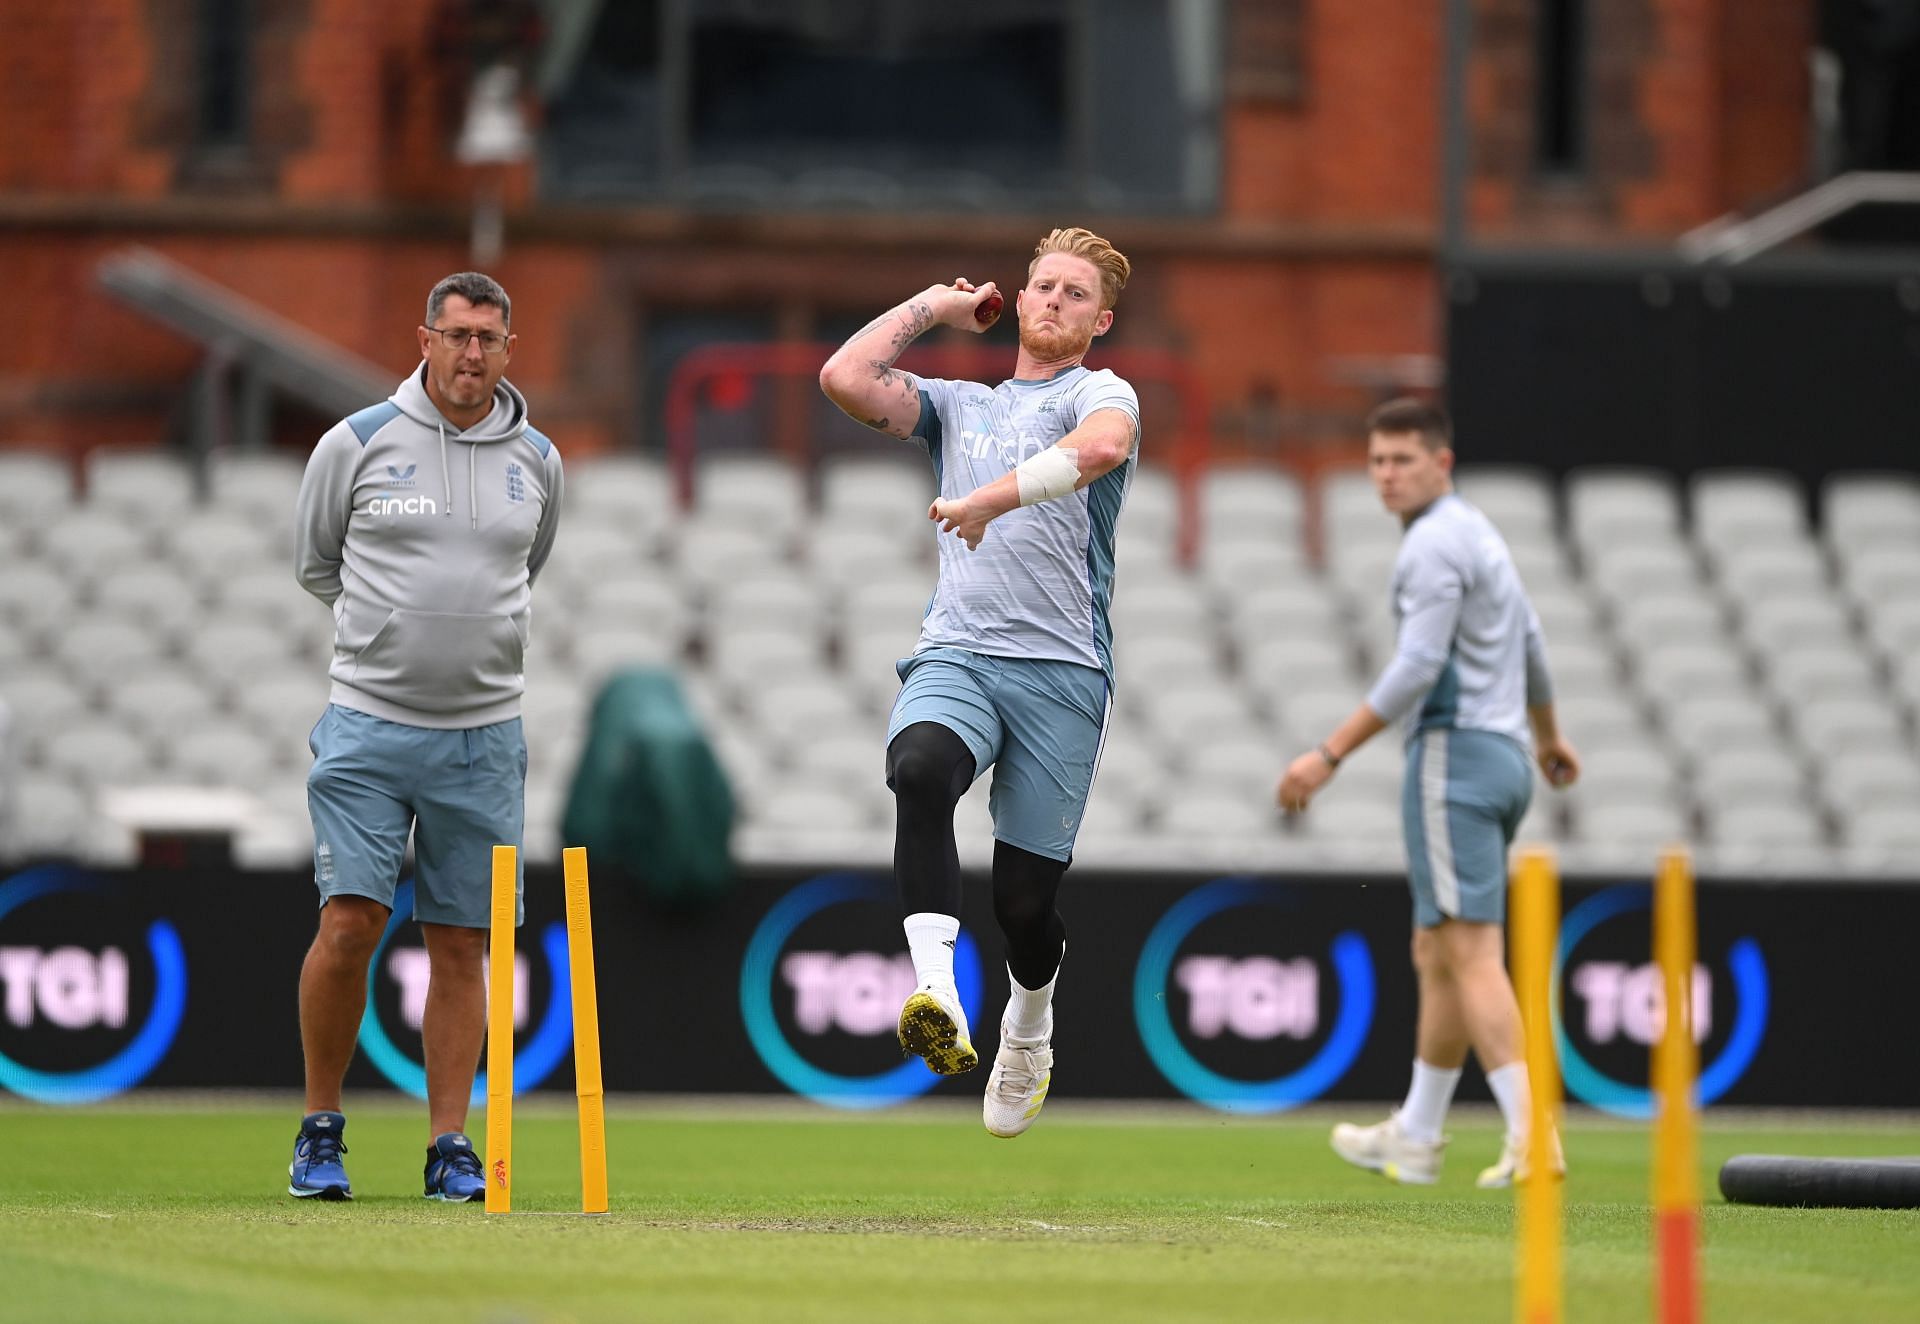 Ben Stokes will add balance with his bowling